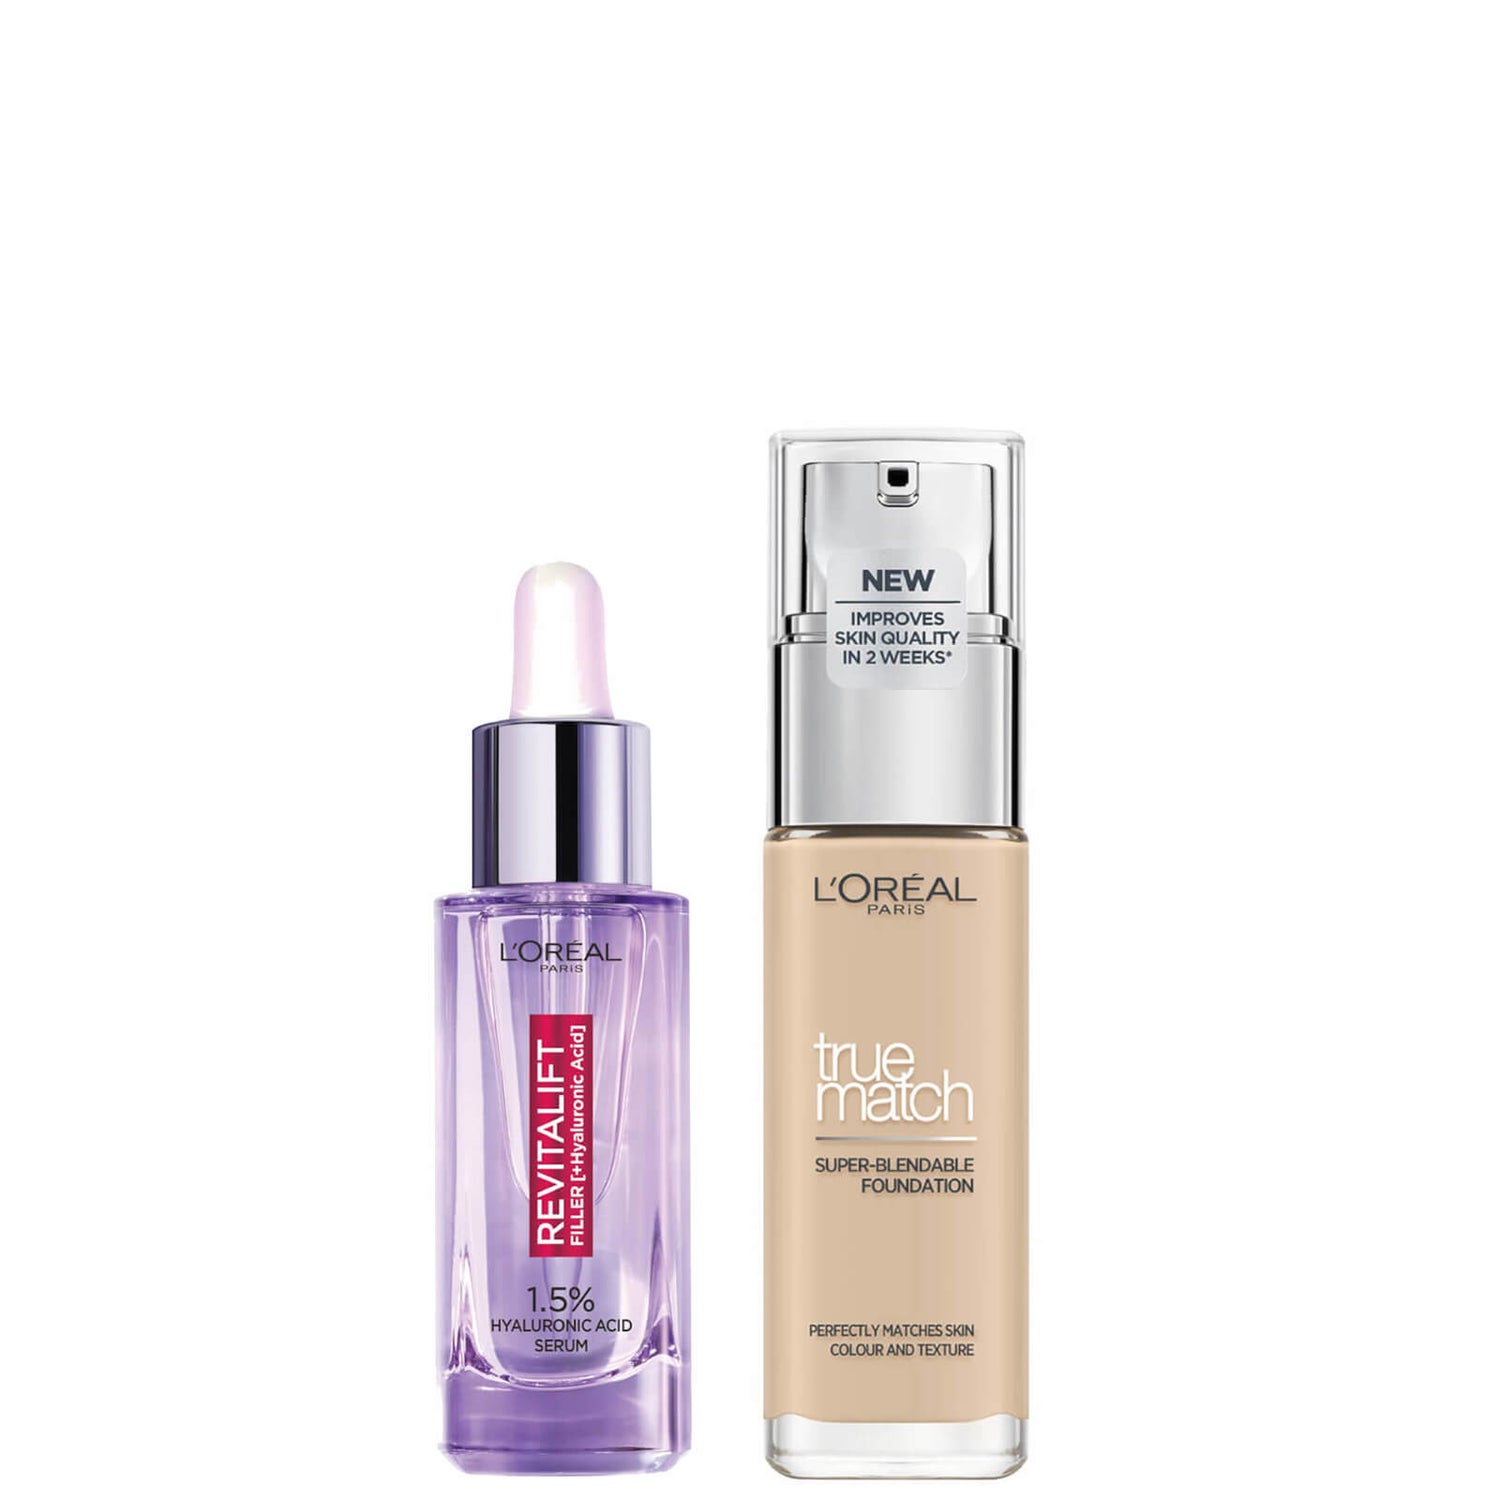 L’Oreal Paris Hyaluronic Acid Filler Serum and True Match Hyaluronic Acid Foundation Duo (Various Shades)